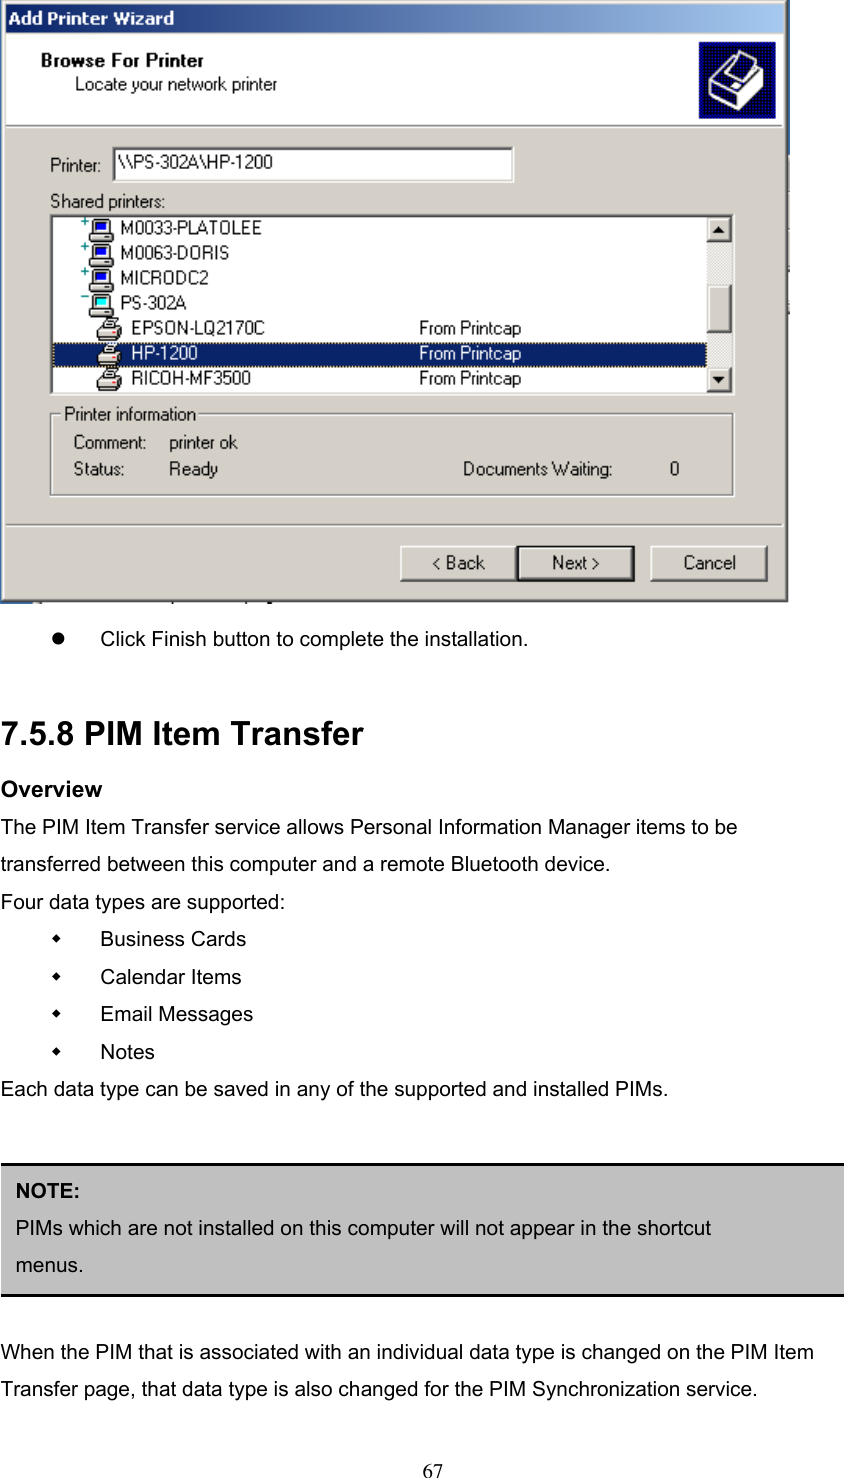    Click Finish button to complete the installation.    7.5.8 PIM Item Transfer Overview The PIM Item Transfer service allows Personal Information Manager items to be transferred between this computer and a remote Bluetooth device. Four data types are supported:   Business Cards   Calendar Items   Email Messages   Notes Each data type can be saved in any of the supported and installed PIMs.       NOTE:  PIMs which are not installed on this computer will not appear in the shortcut menus. When the PIM that is associated with an individual data type is changed on the PIM Item Transfer page, that data type is also changed for the PIM Synchronization service.  67 